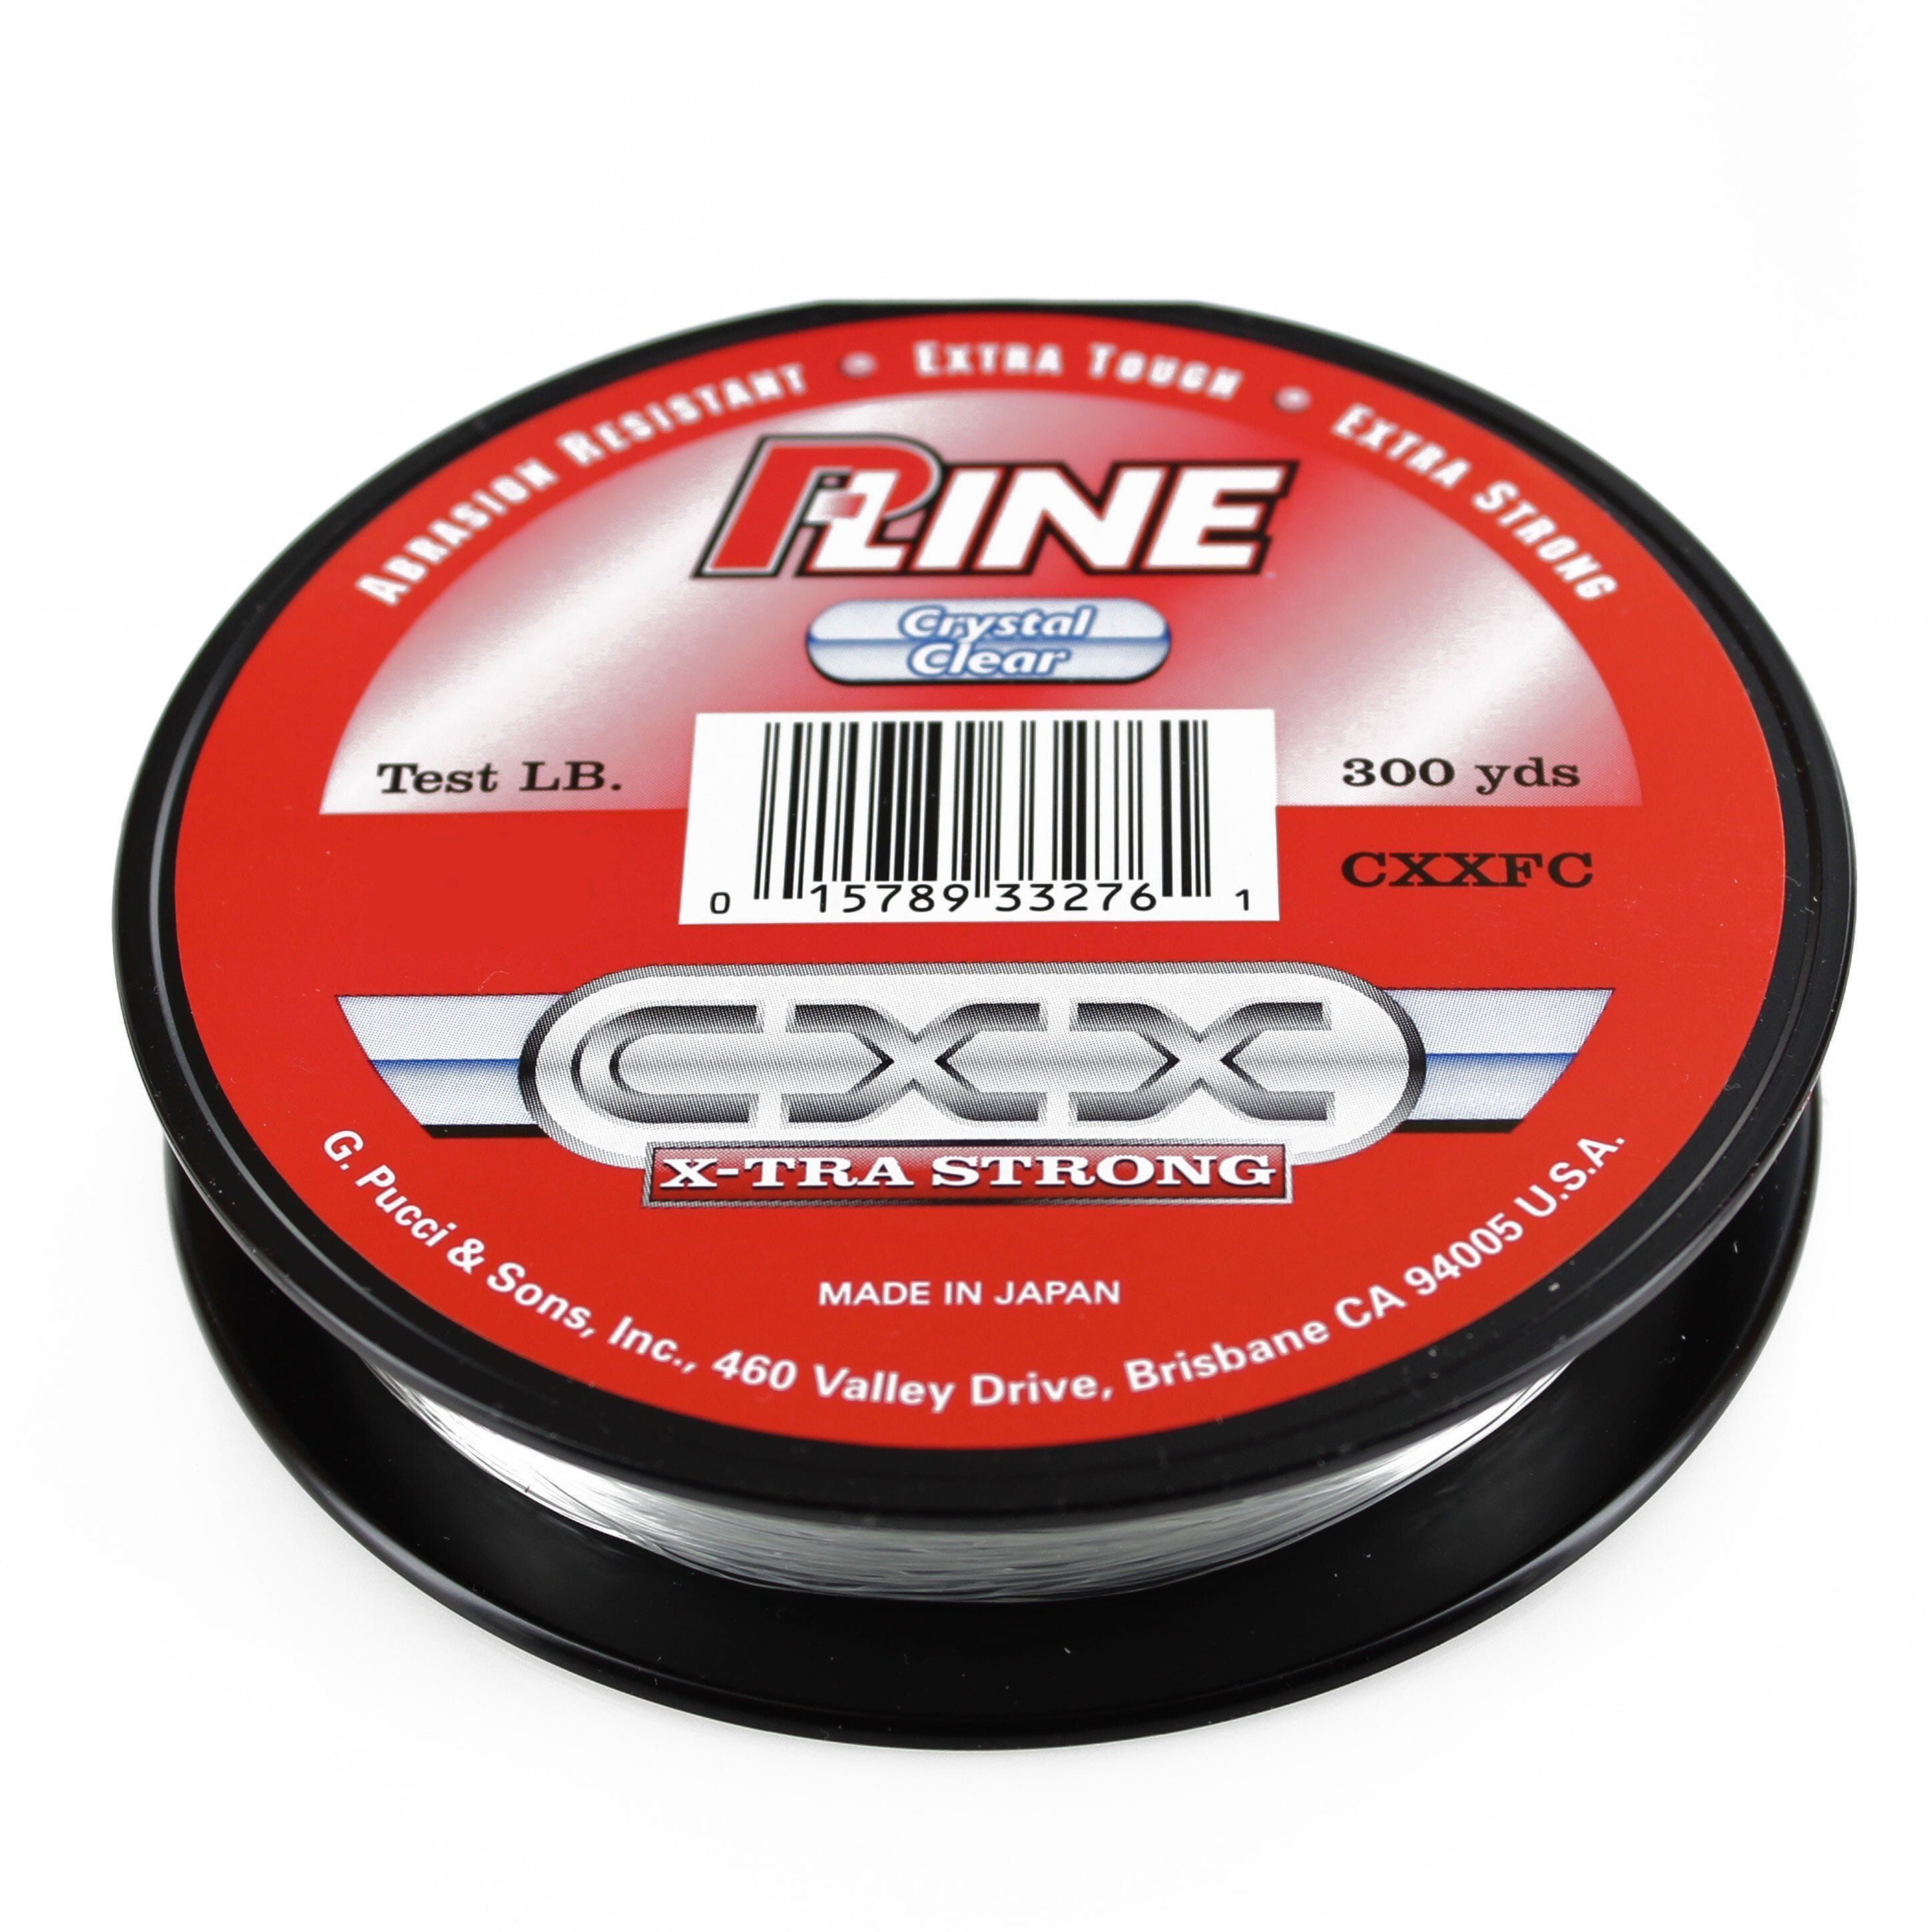 P-Line CXX X-tra Strong Copolymer - 260-300 Yards